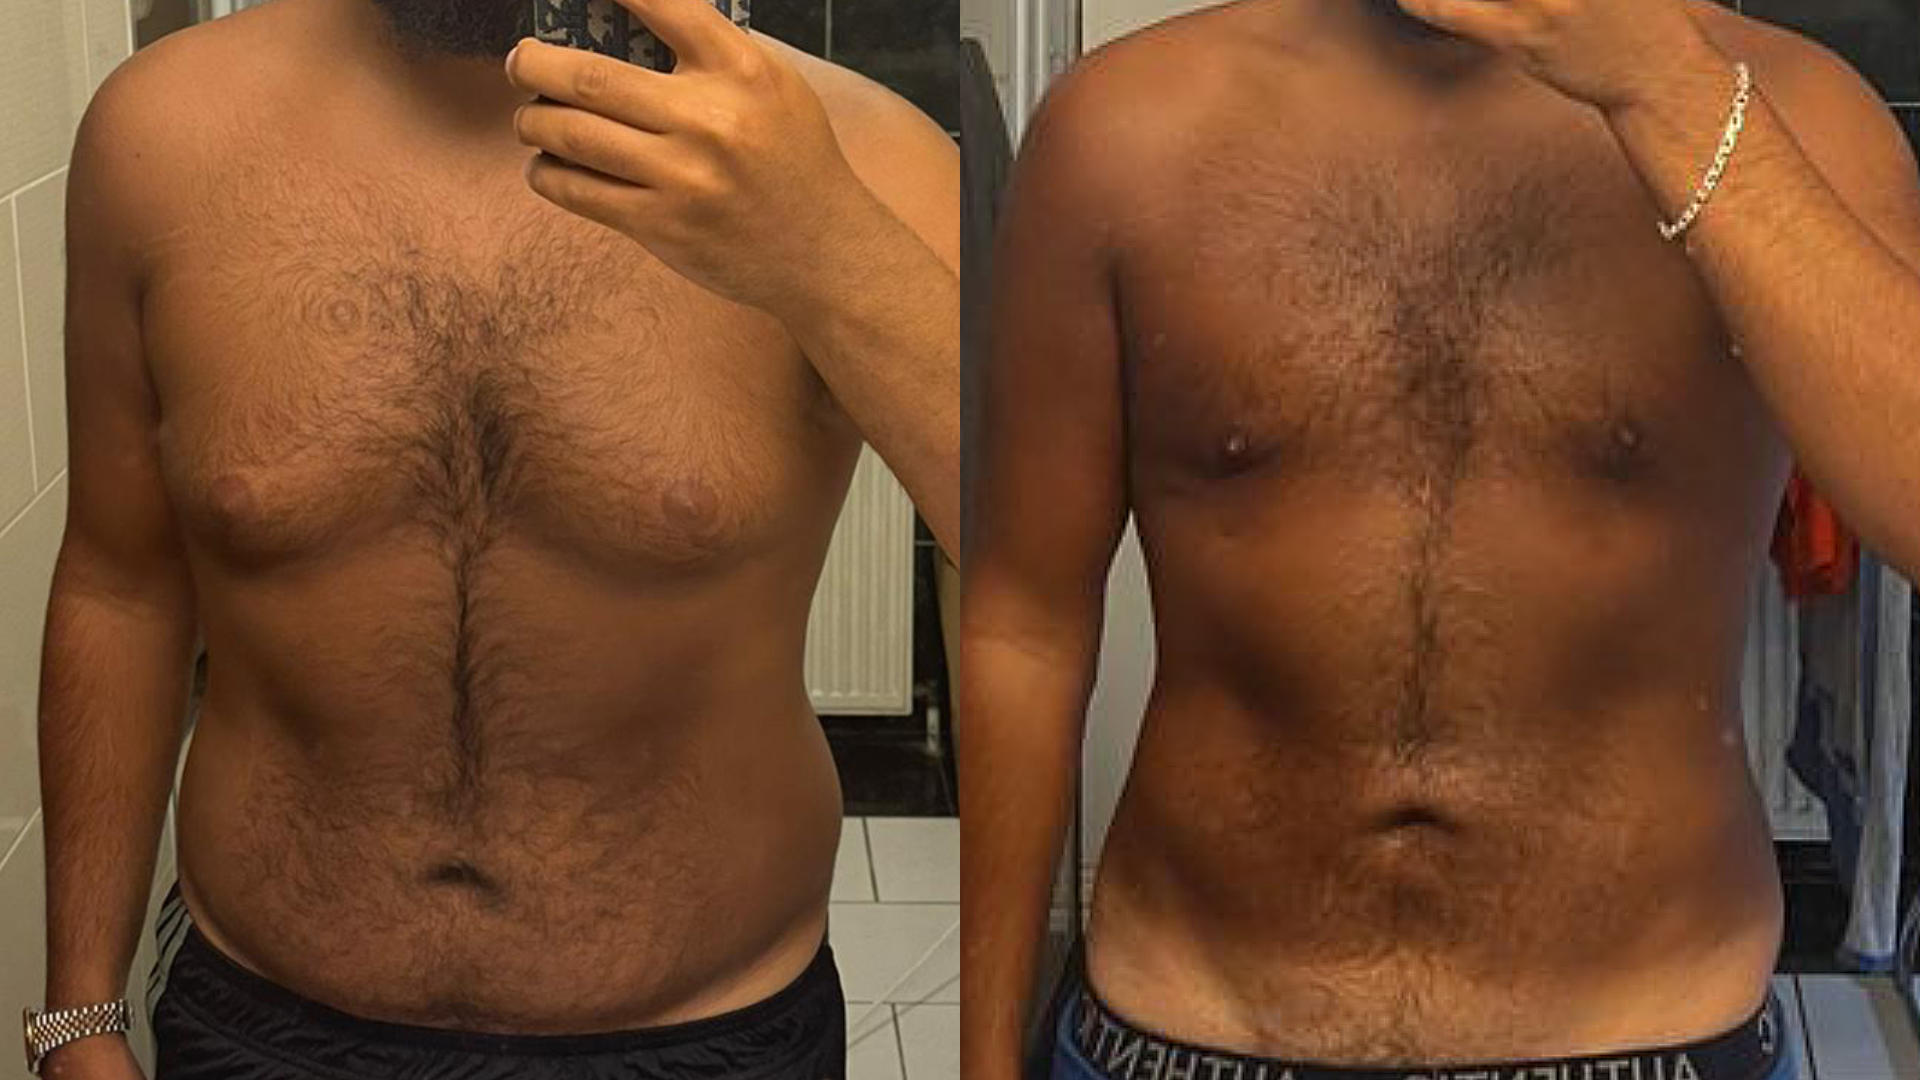 Gynecomastia treatment in Turkey : before / after